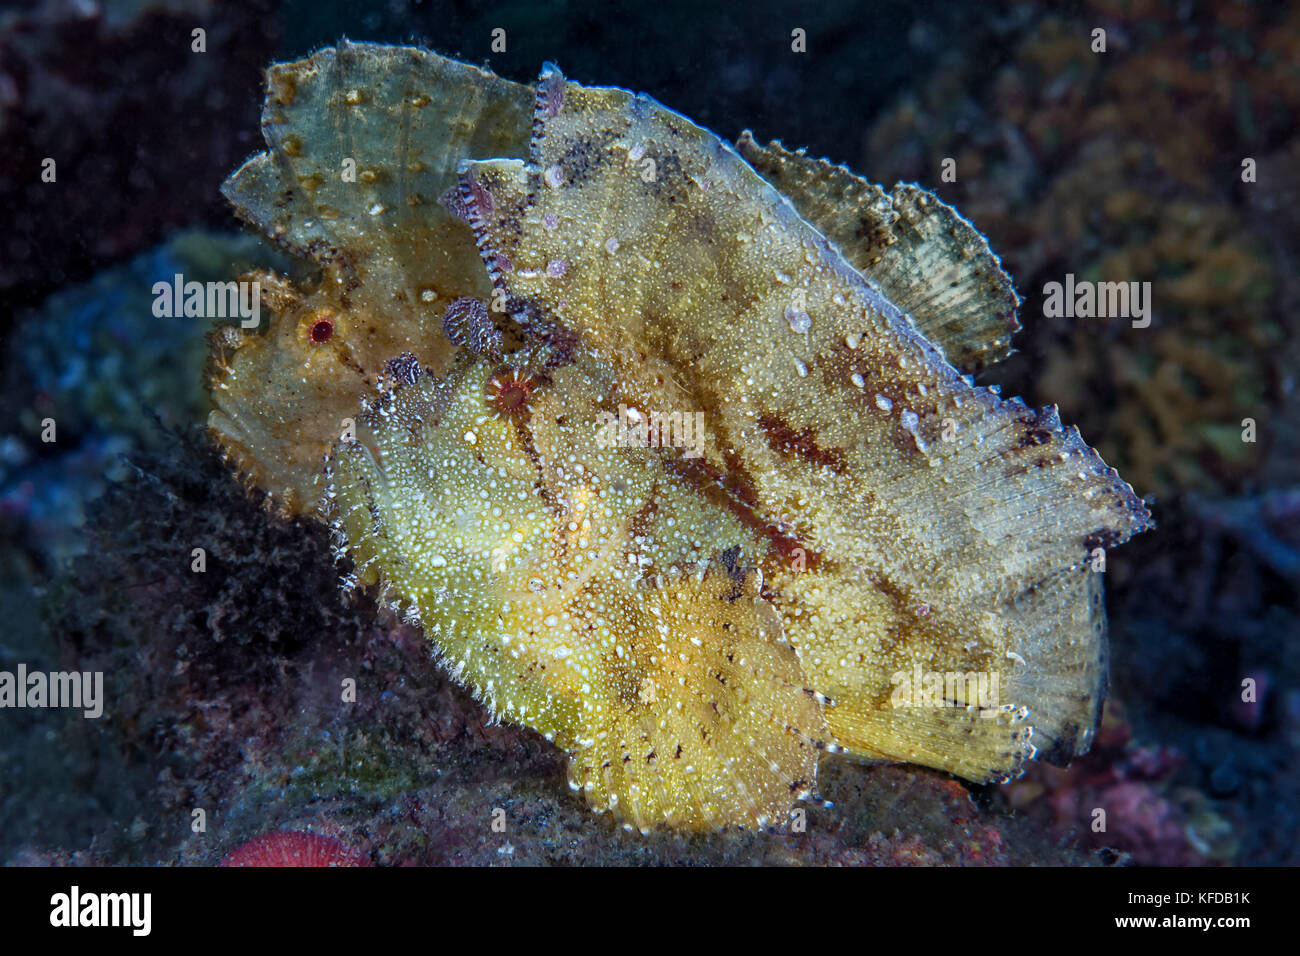 Leaf scorpionfish also known as Paper scorpionfish (Taenianotus triacanthus), Ambon, Indonesia. Stock Photo